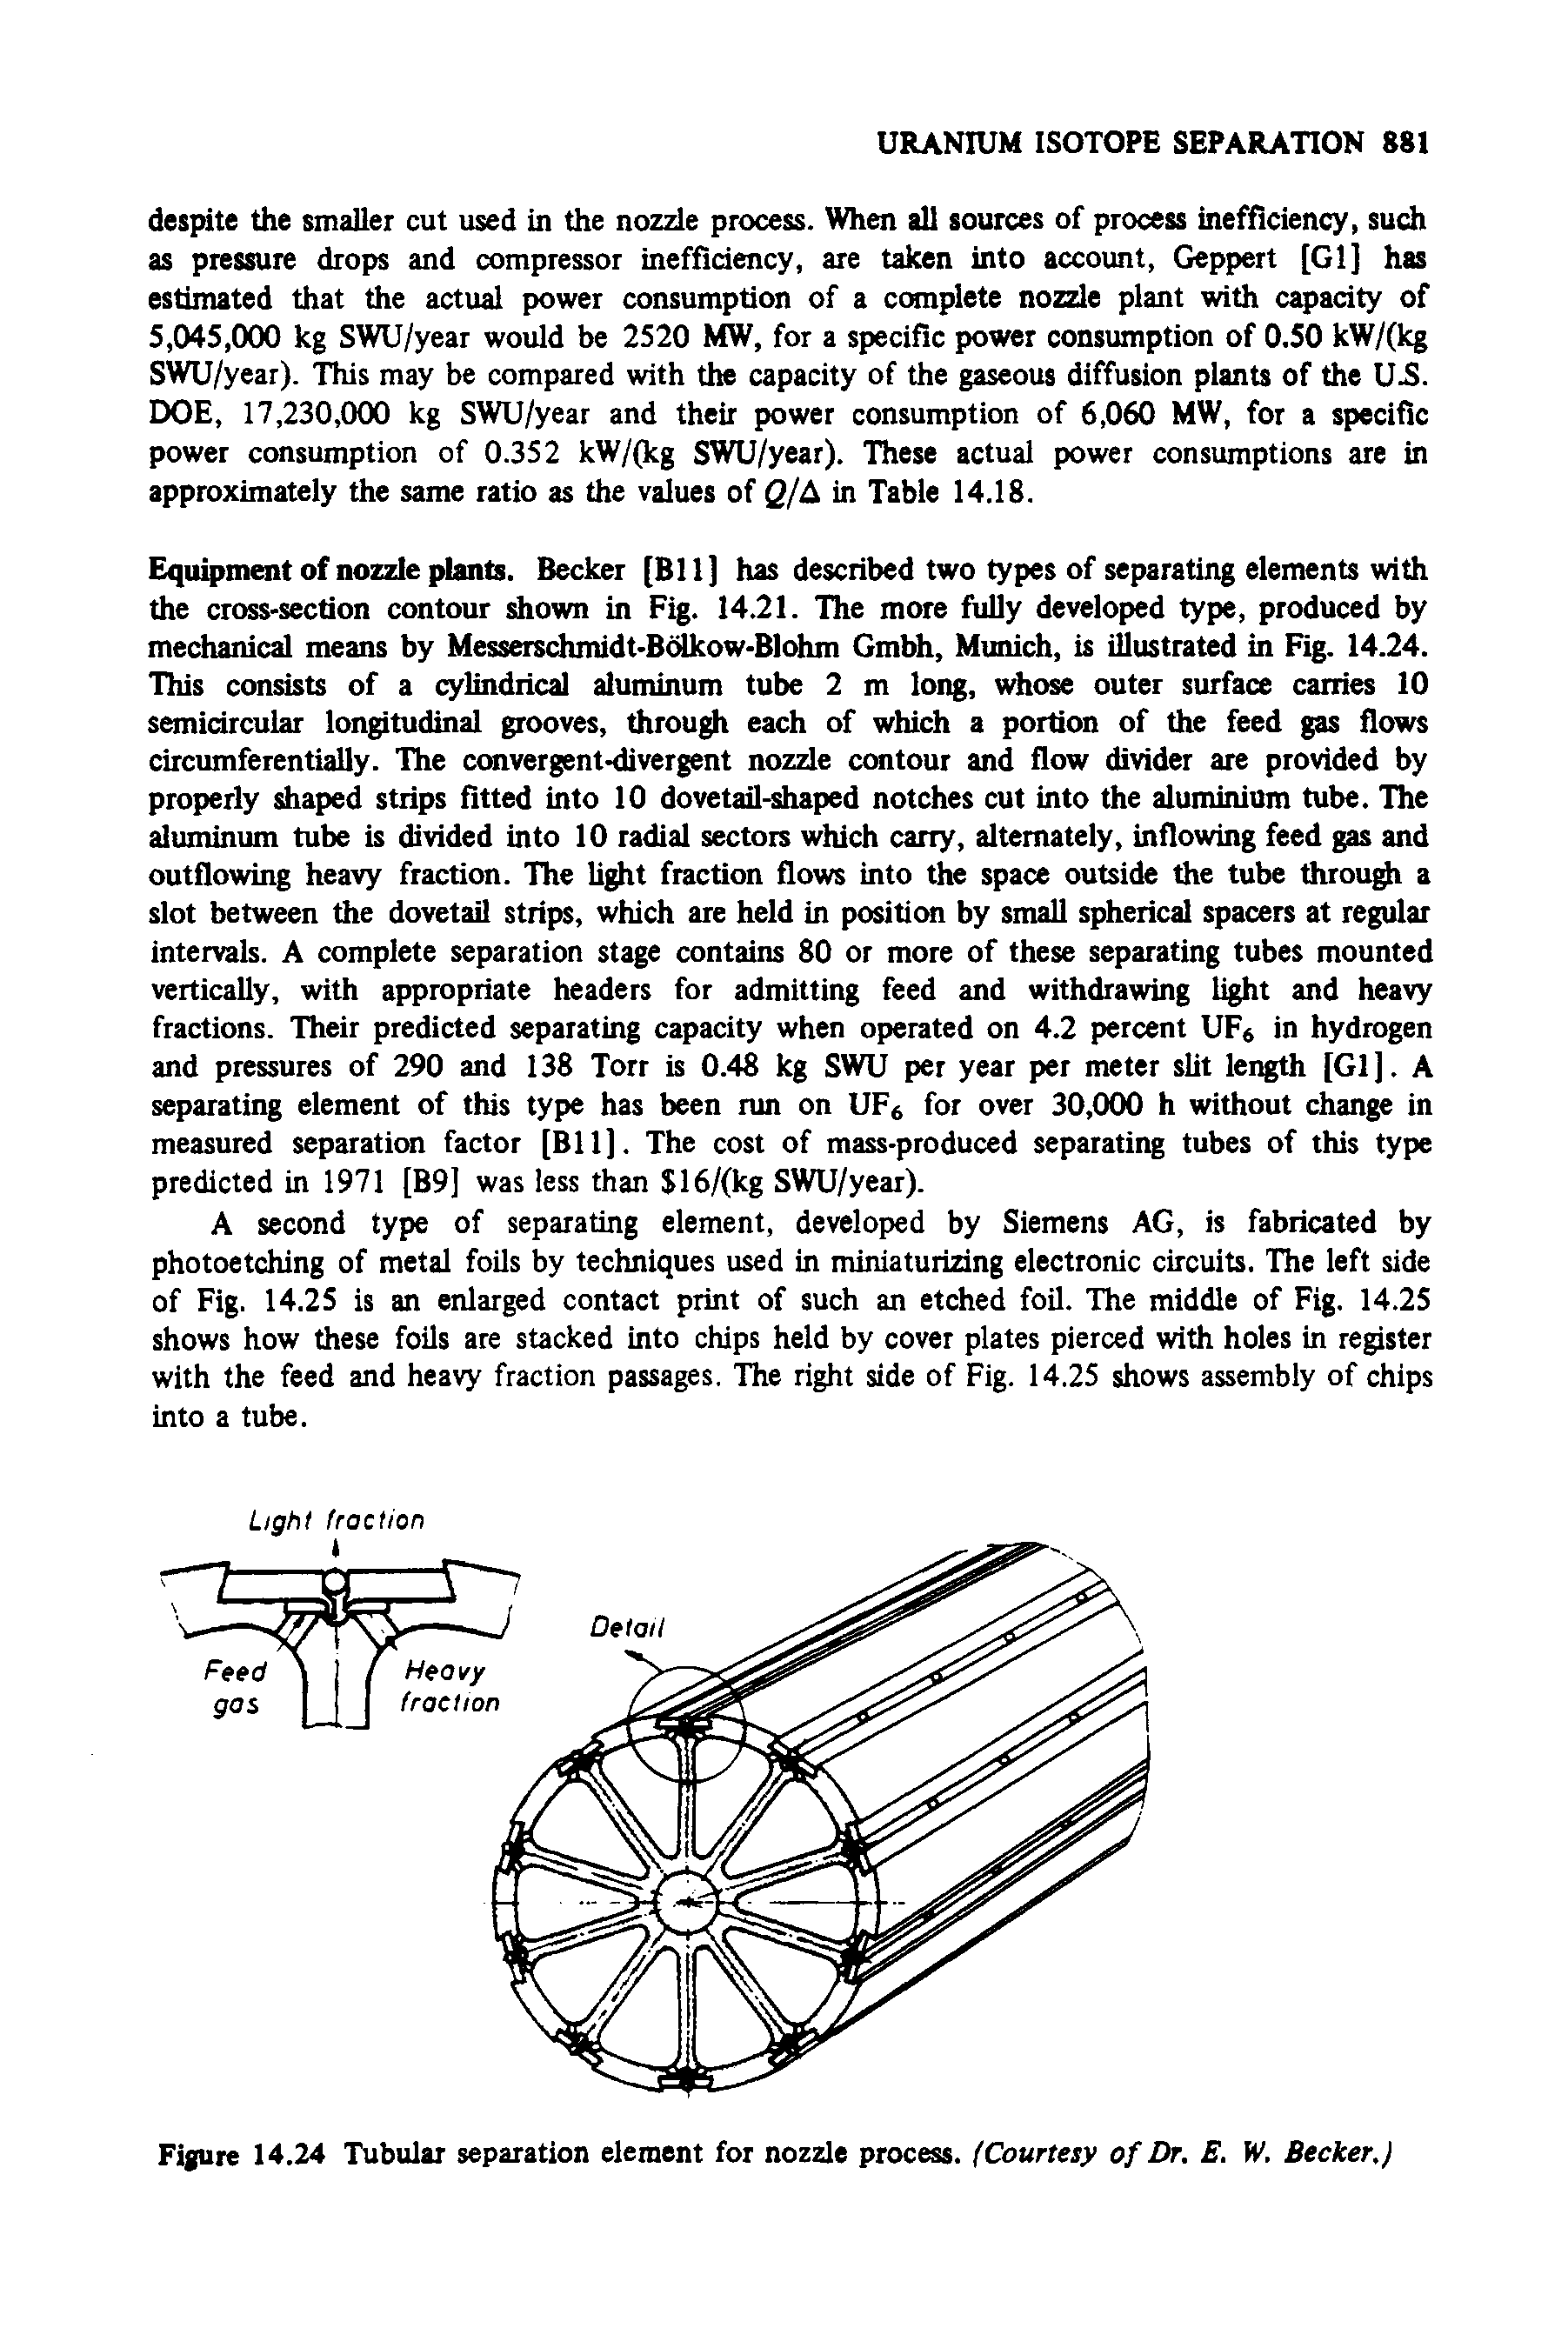 Figure 14.24 Tubular separation element for nozzle process. (Courtesy of Dr. E. W. Becker.)...